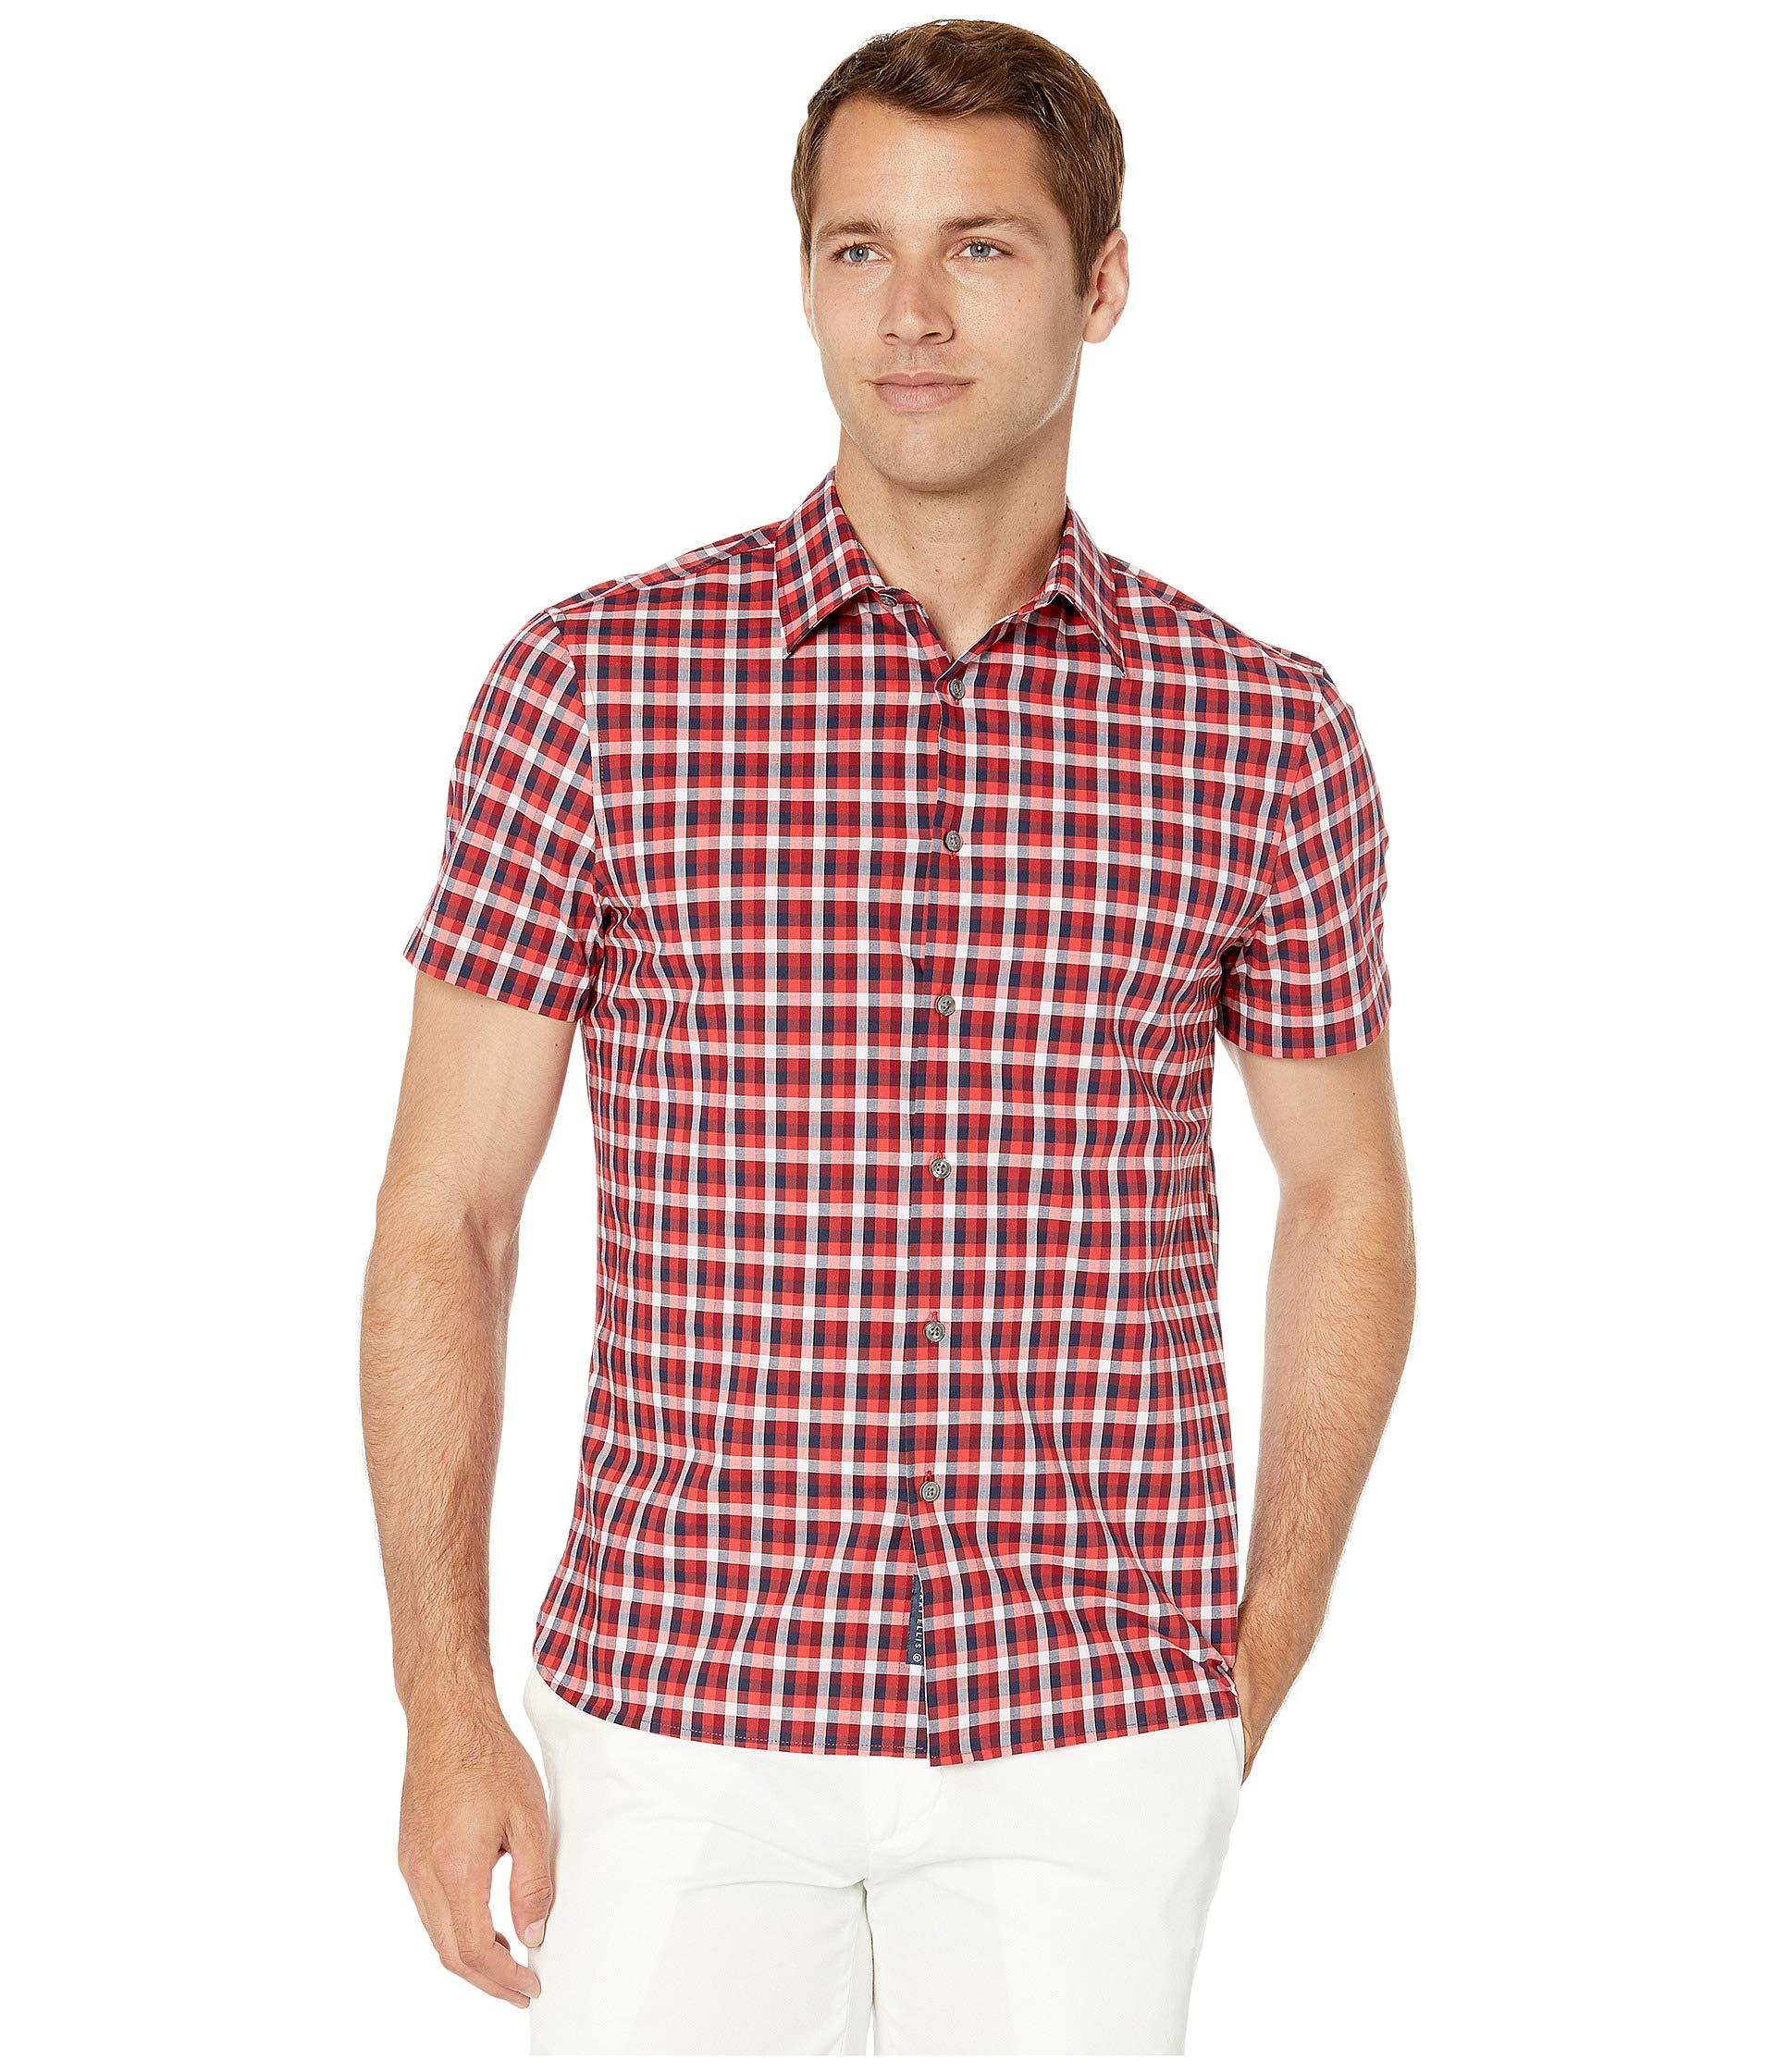 Perry Ellis Portfolio Cotton Check Stretch Shirt in Red for Men - Lyst